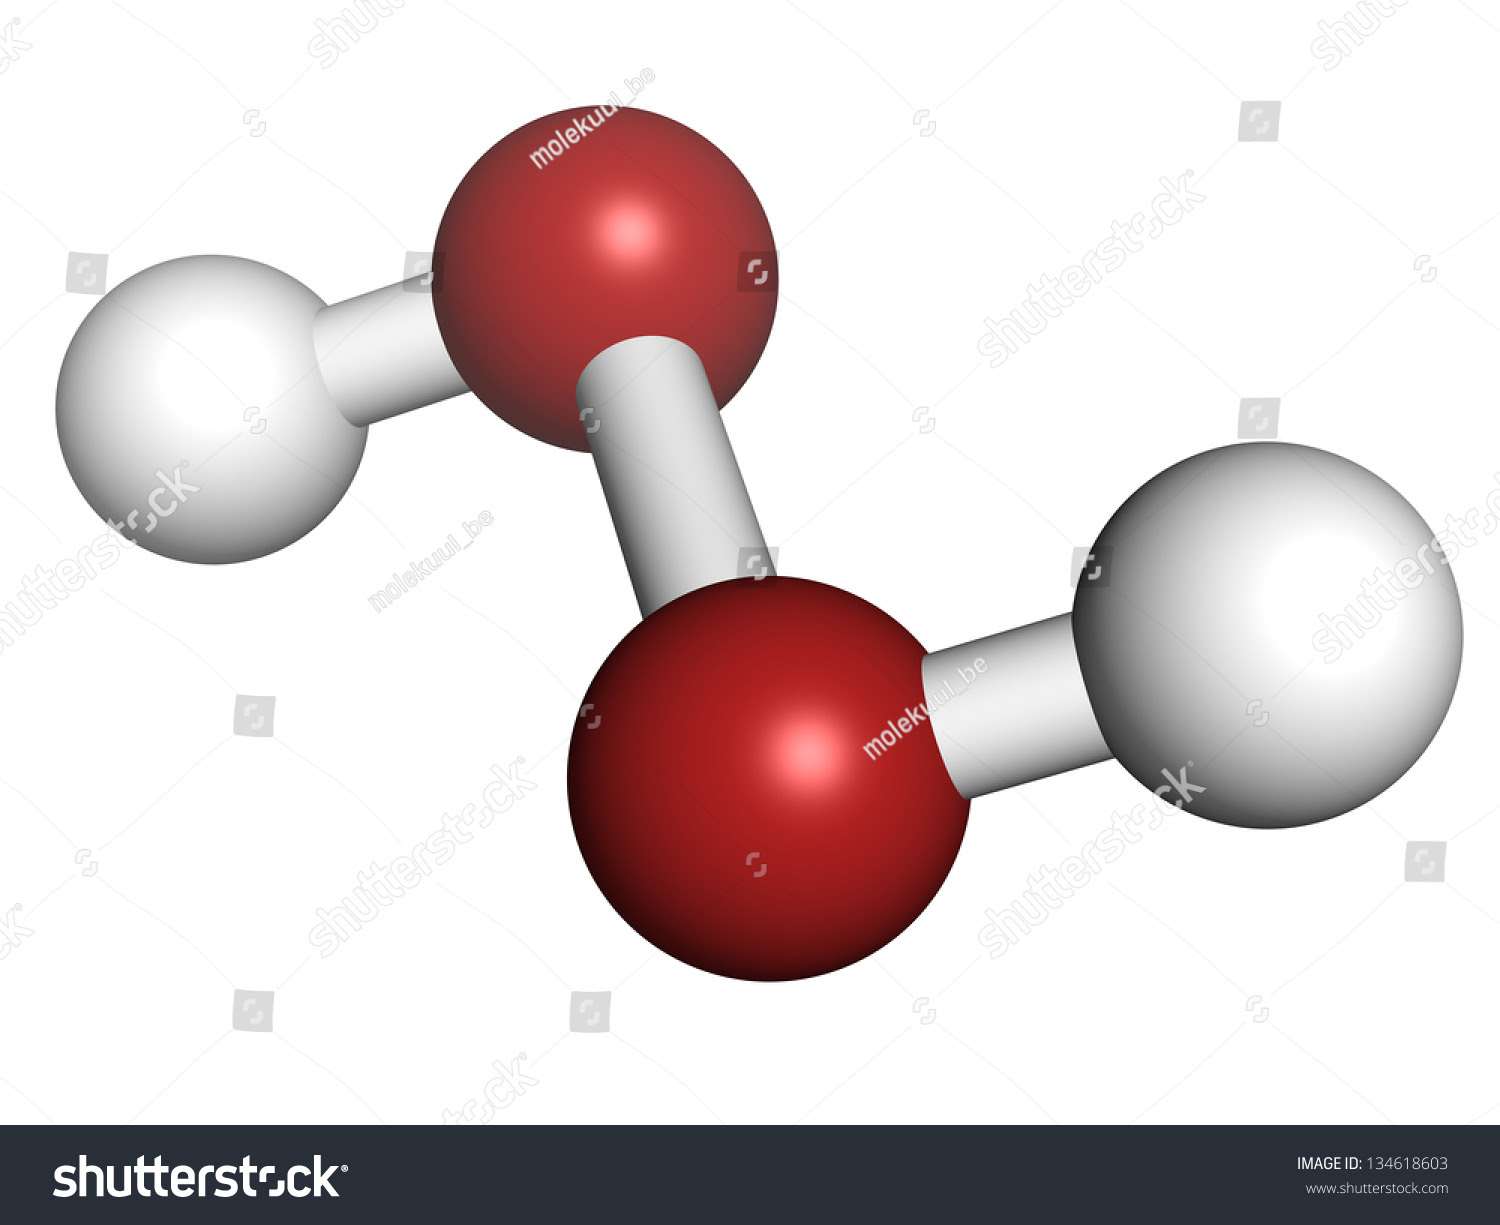 rosegoldesigns: Hydrogen Peroxide Chemical Structure